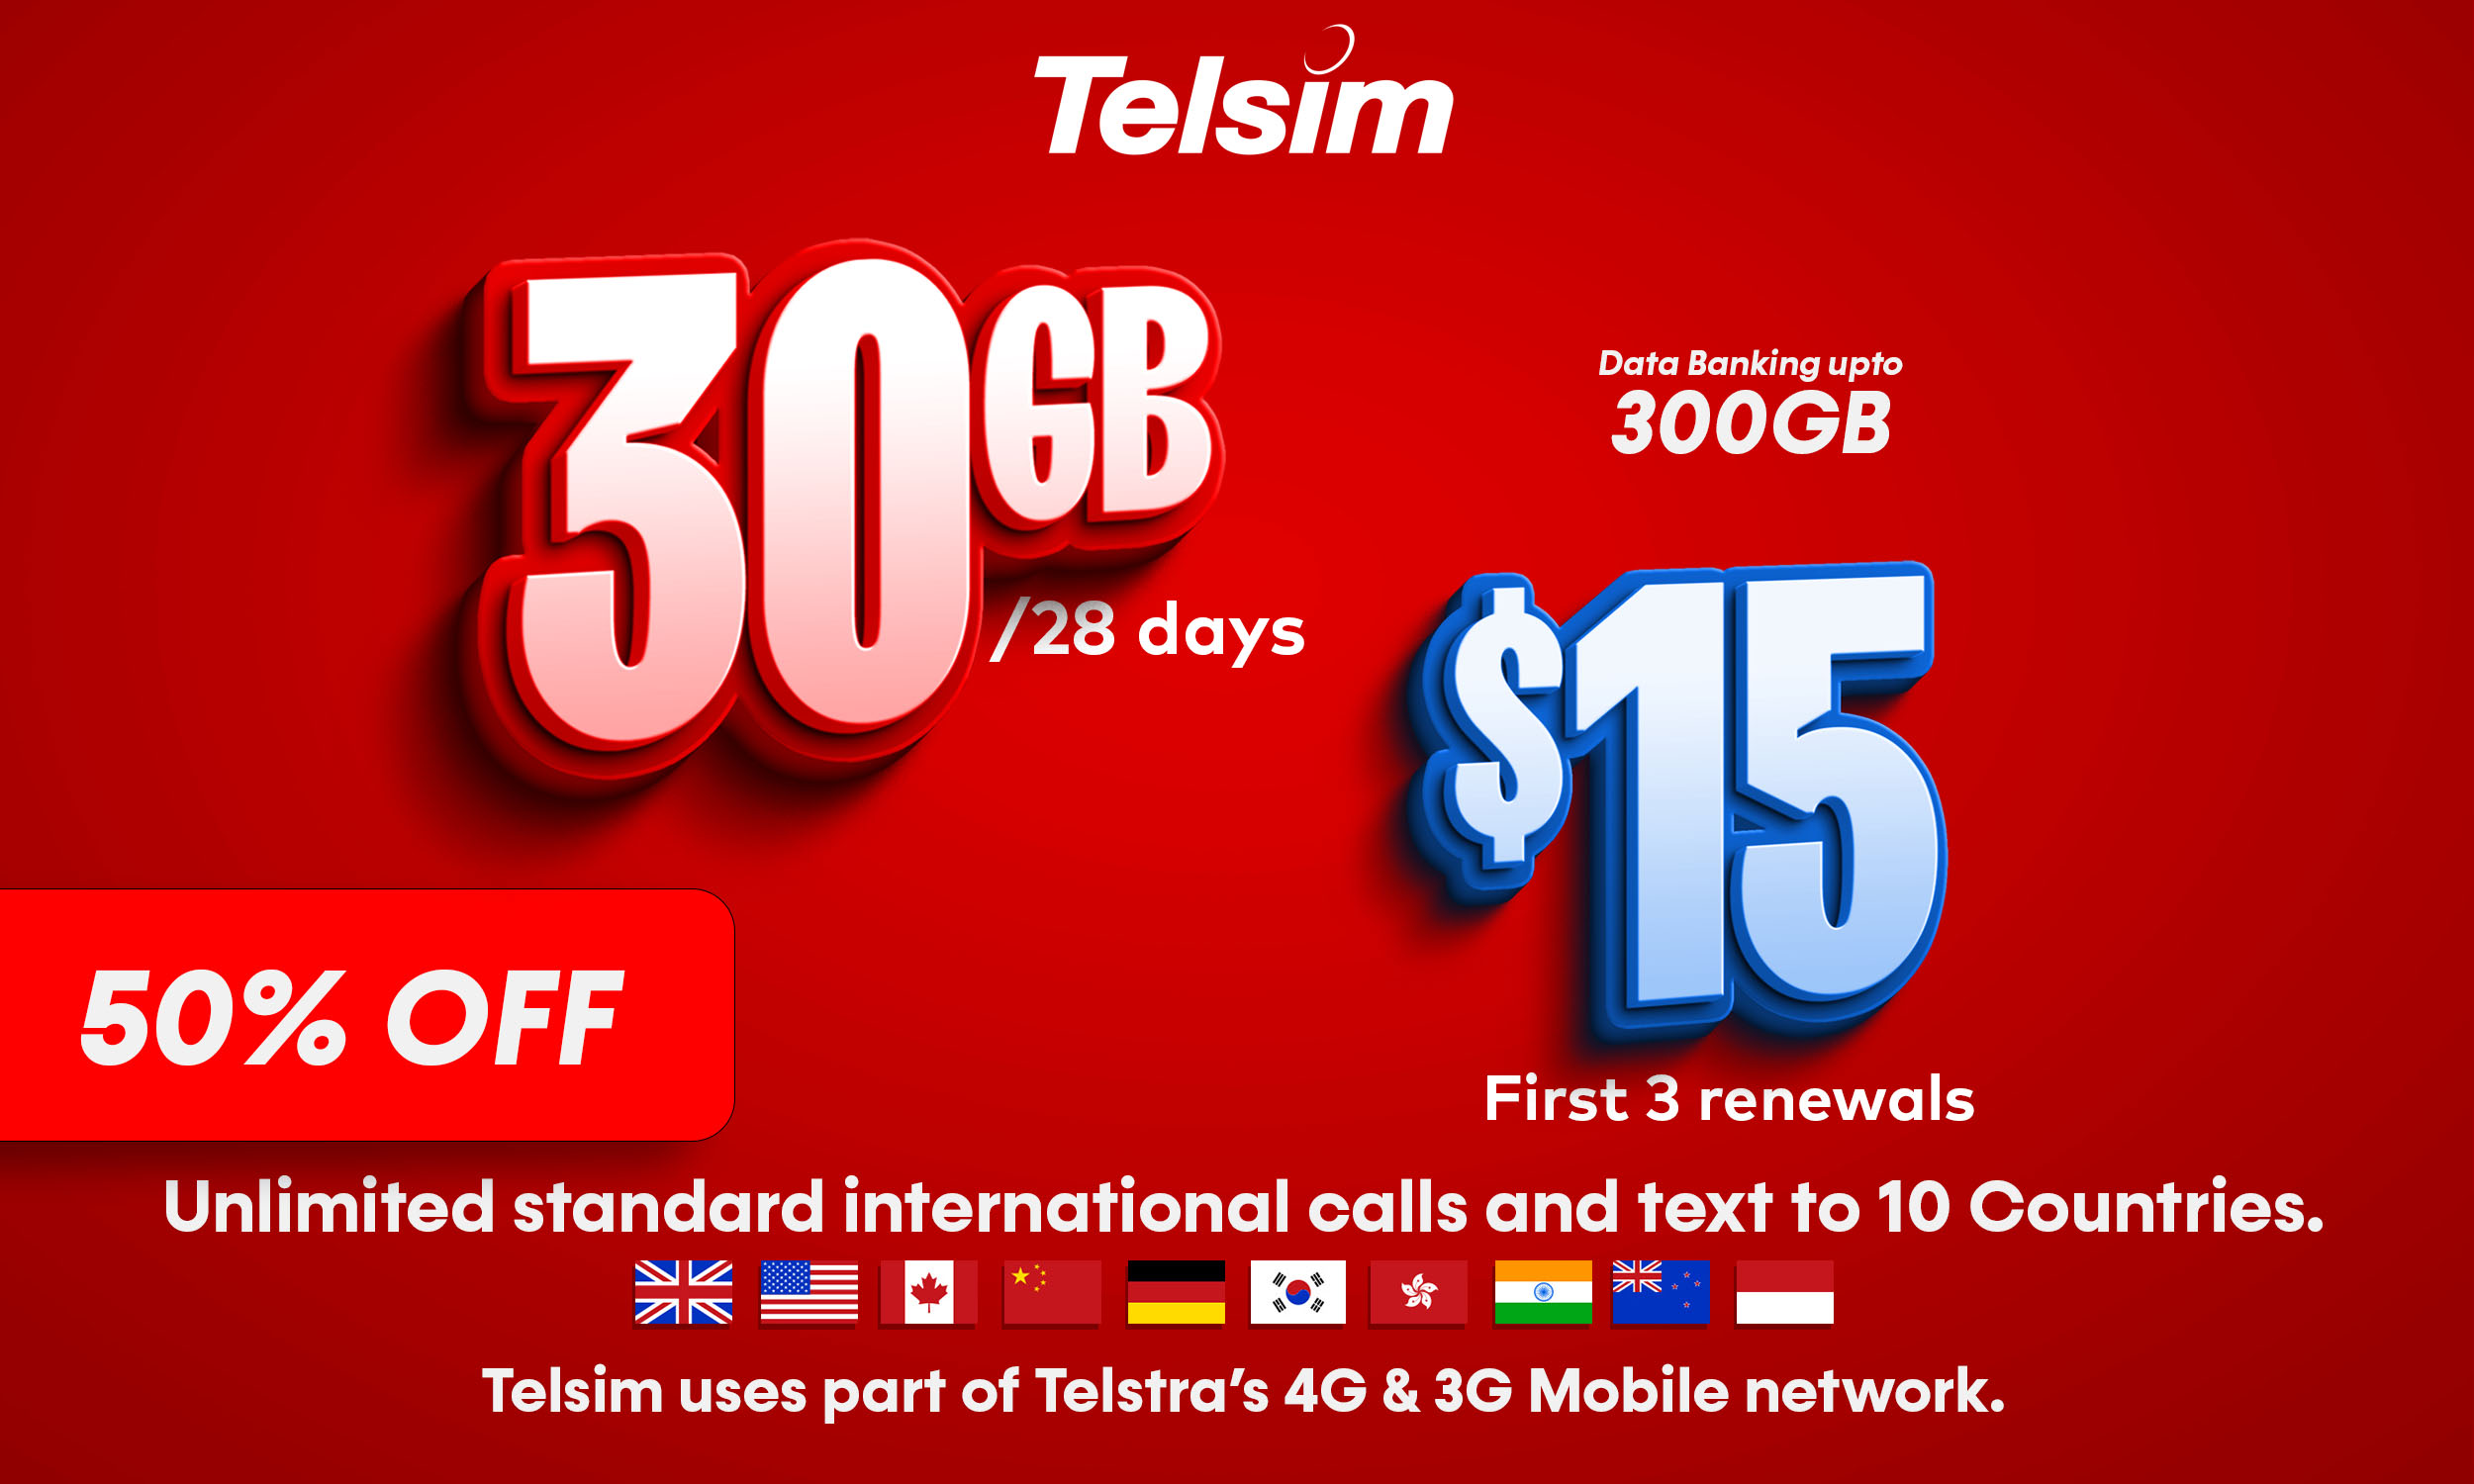 30GB for 15 dollar special offer prepaid monthly plan, free simcards